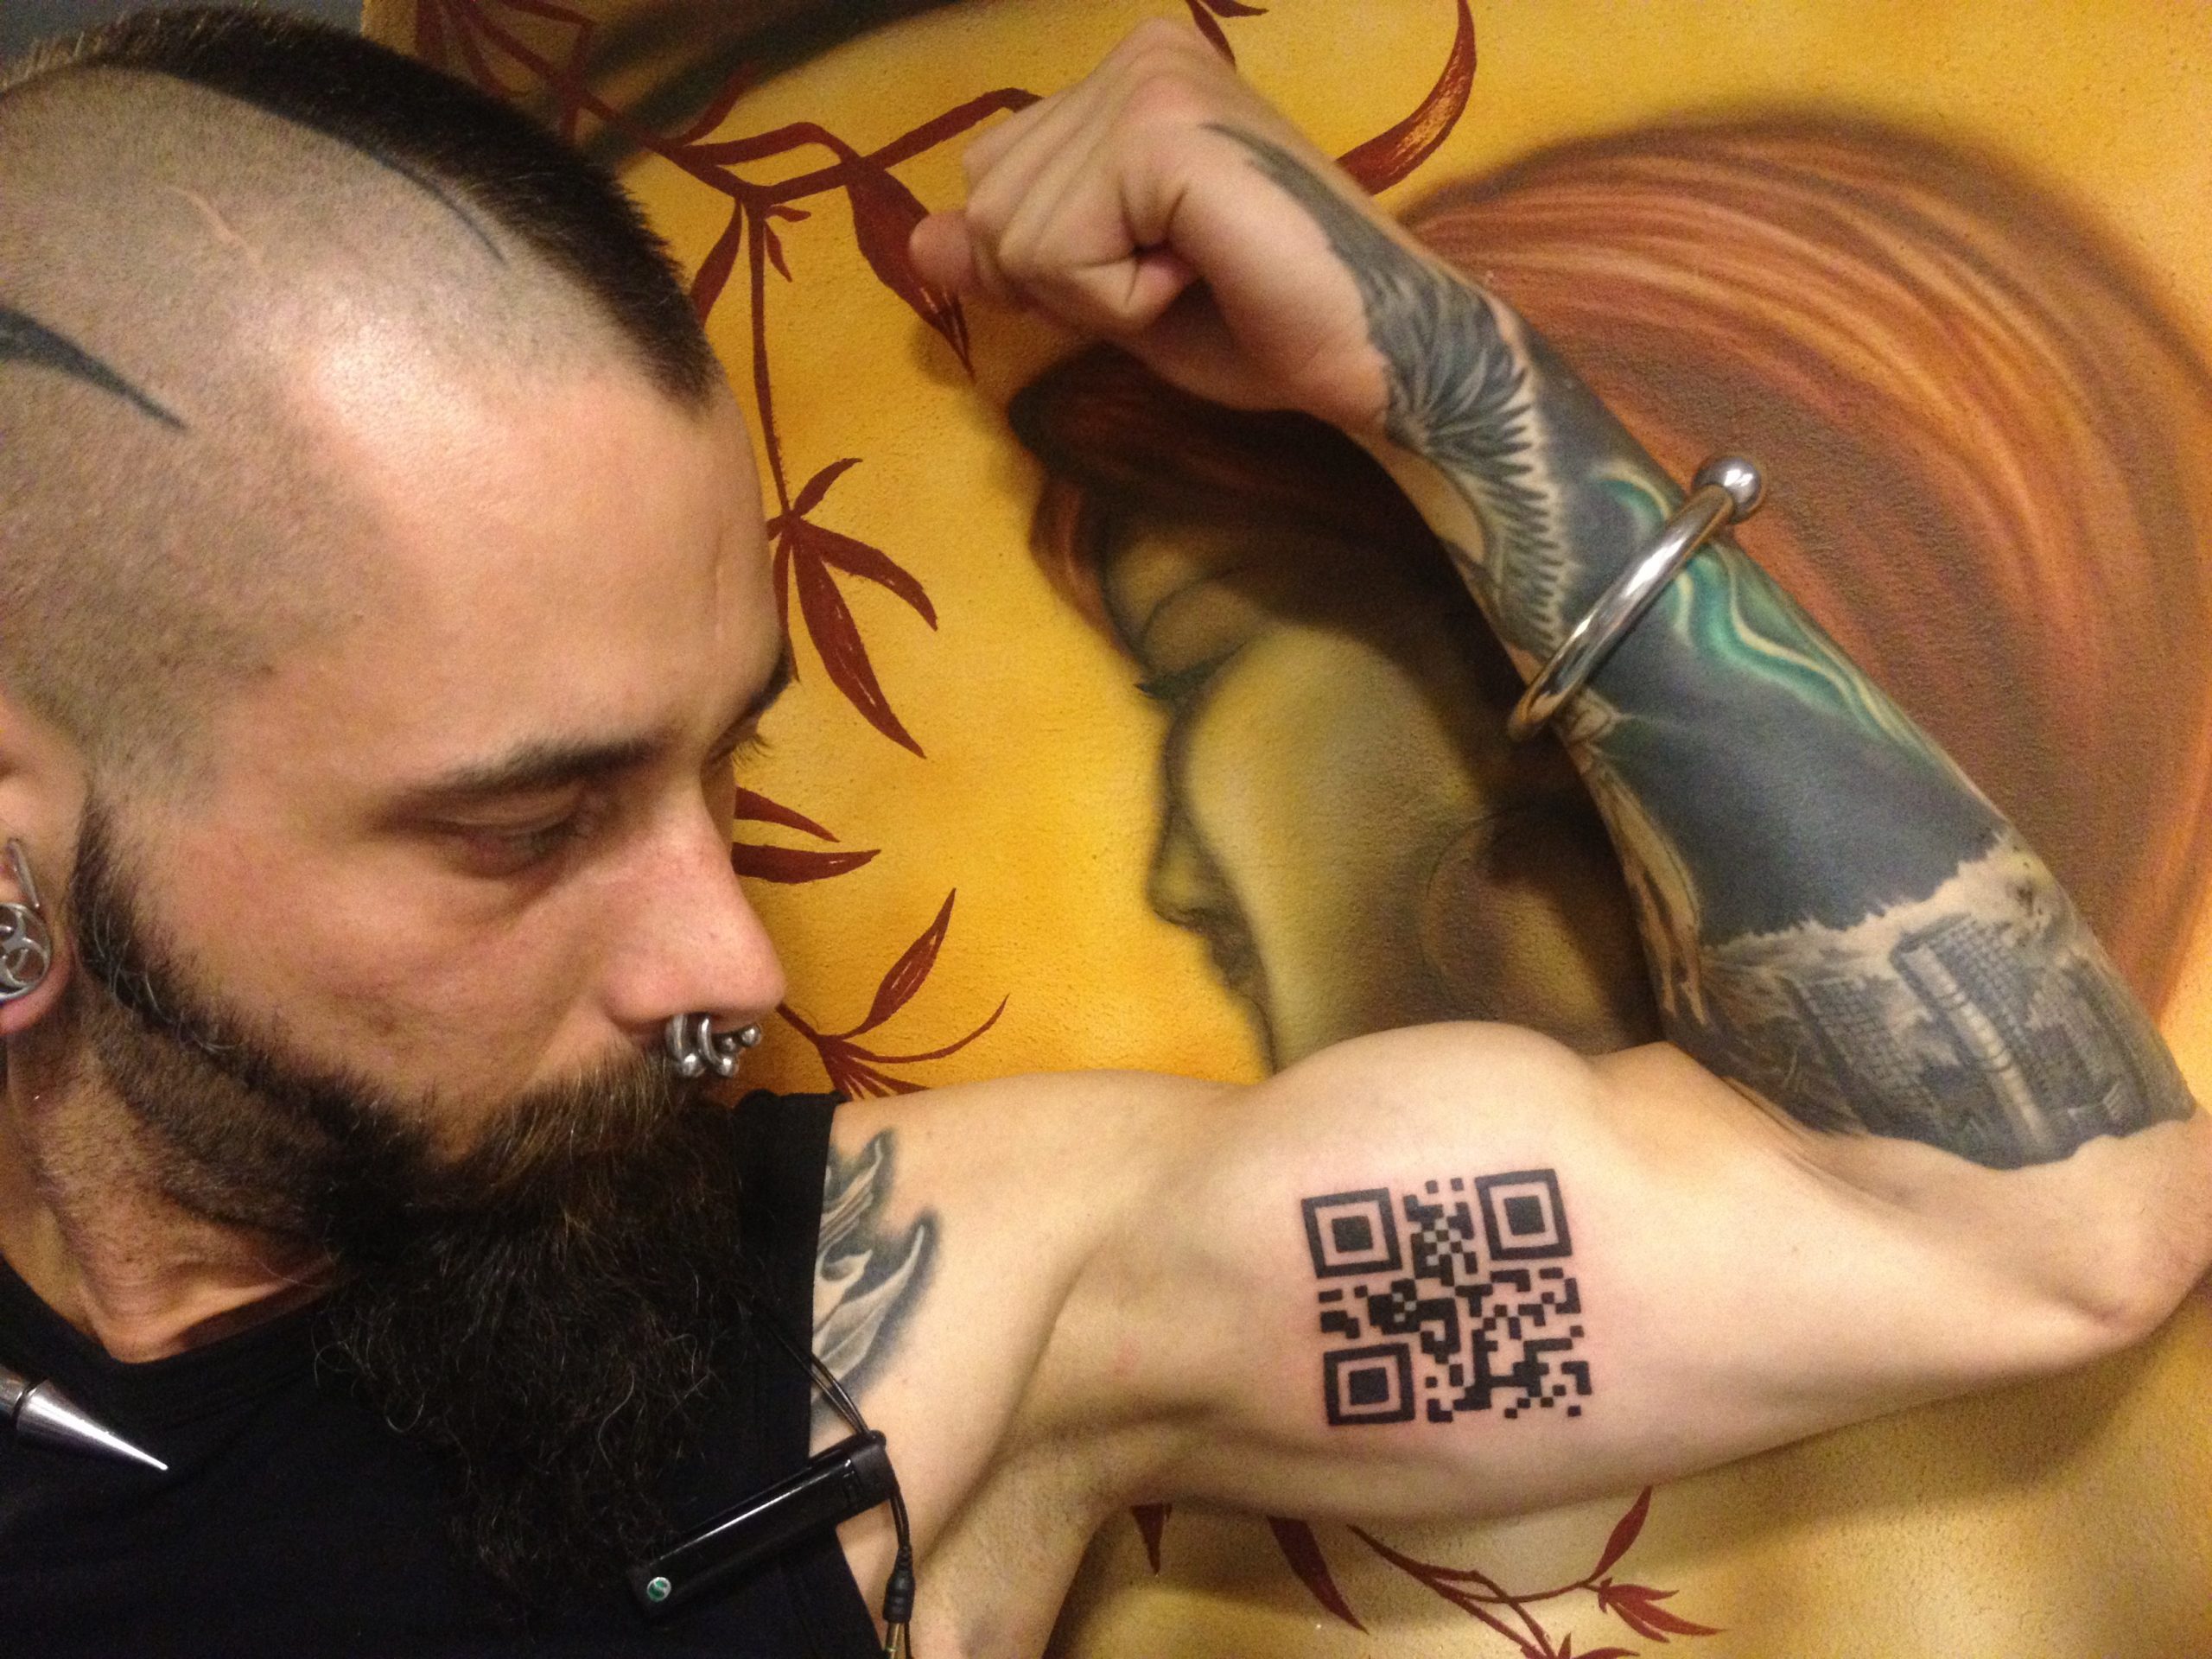 Who's Ready for an Animated Tattoo Using QR Codes? - Camcode